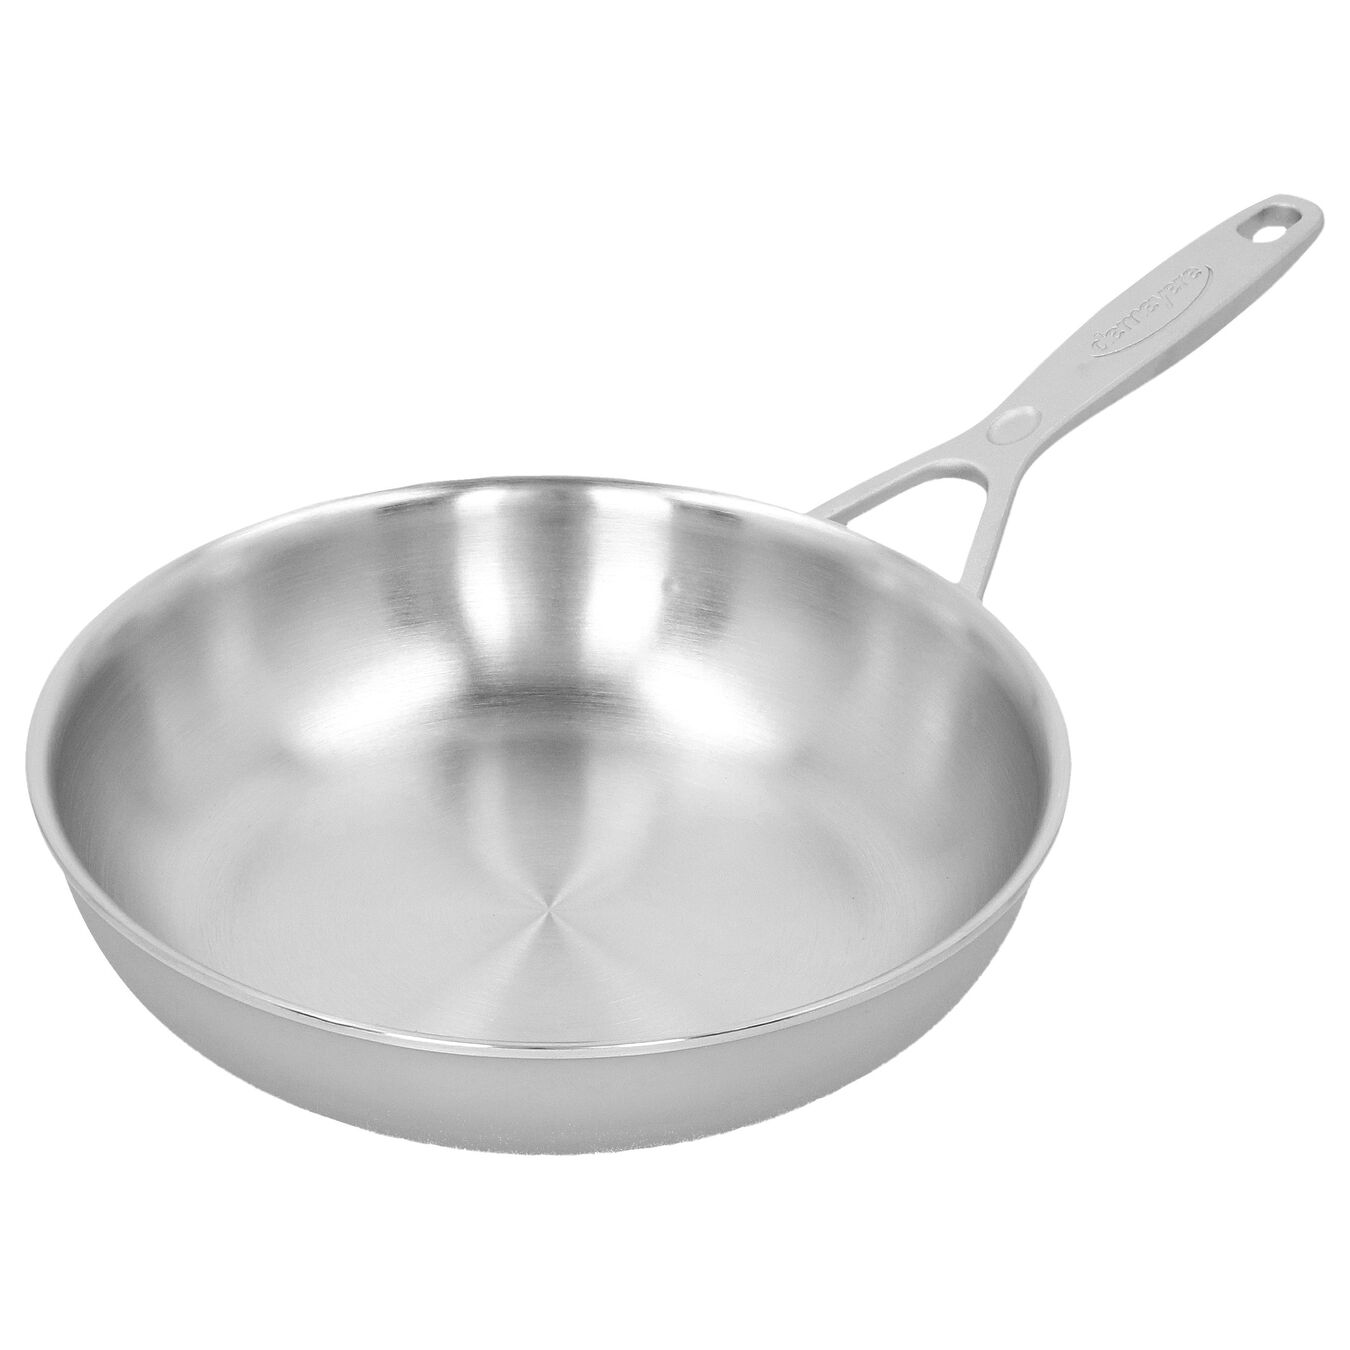 8-inch, 18/10 Stainless Steel, Frying pan,,large 4